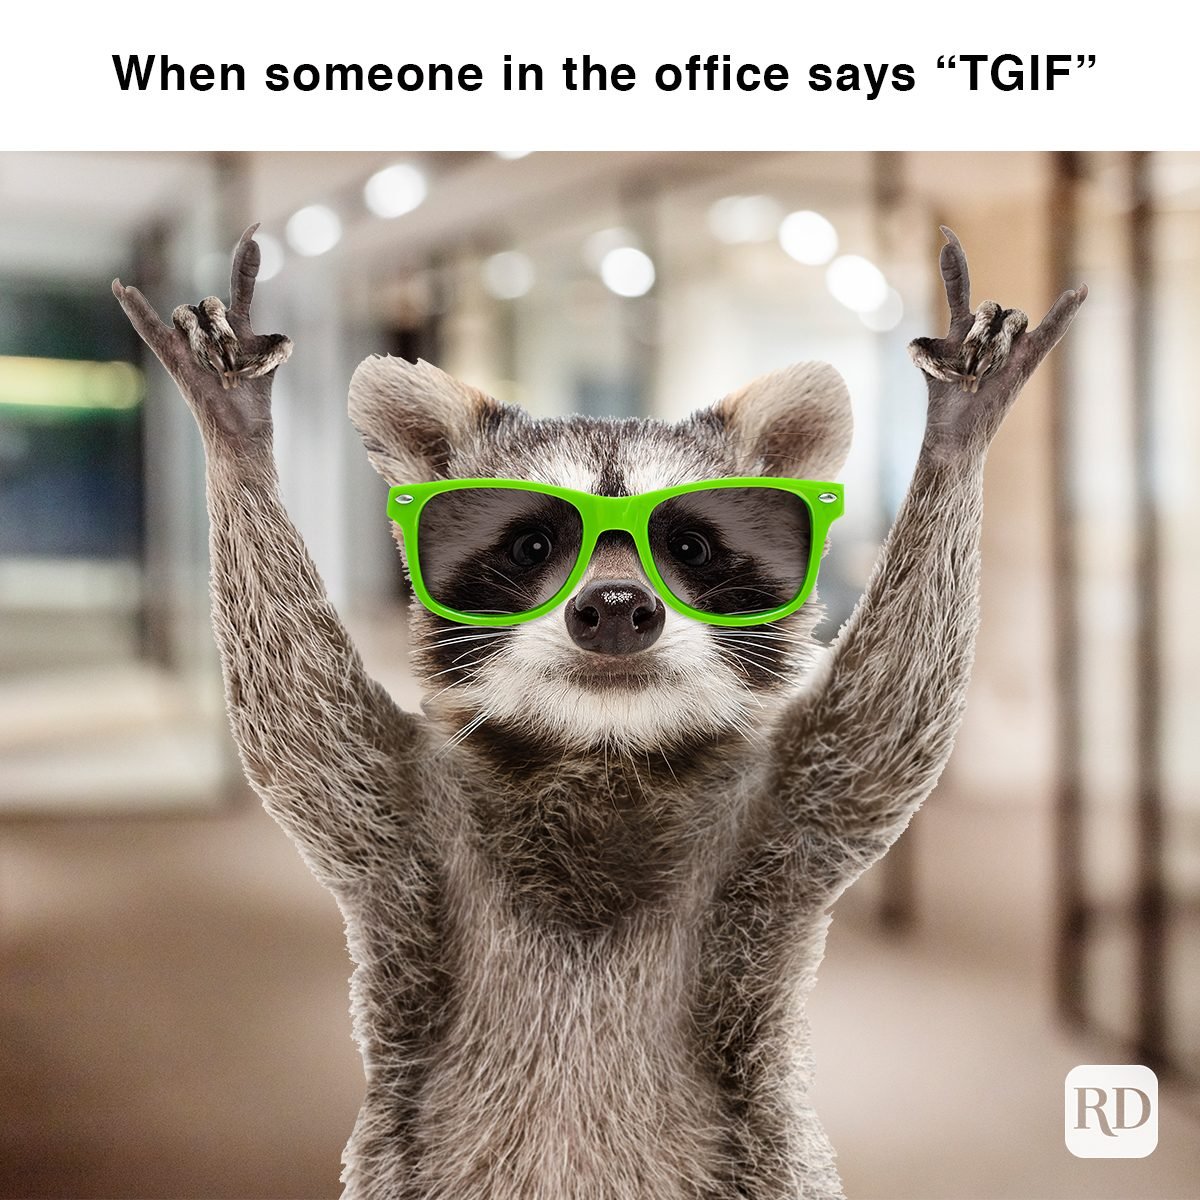 When-someone-in-the-office-says-TGIF-1313115119-1154370446.jpg